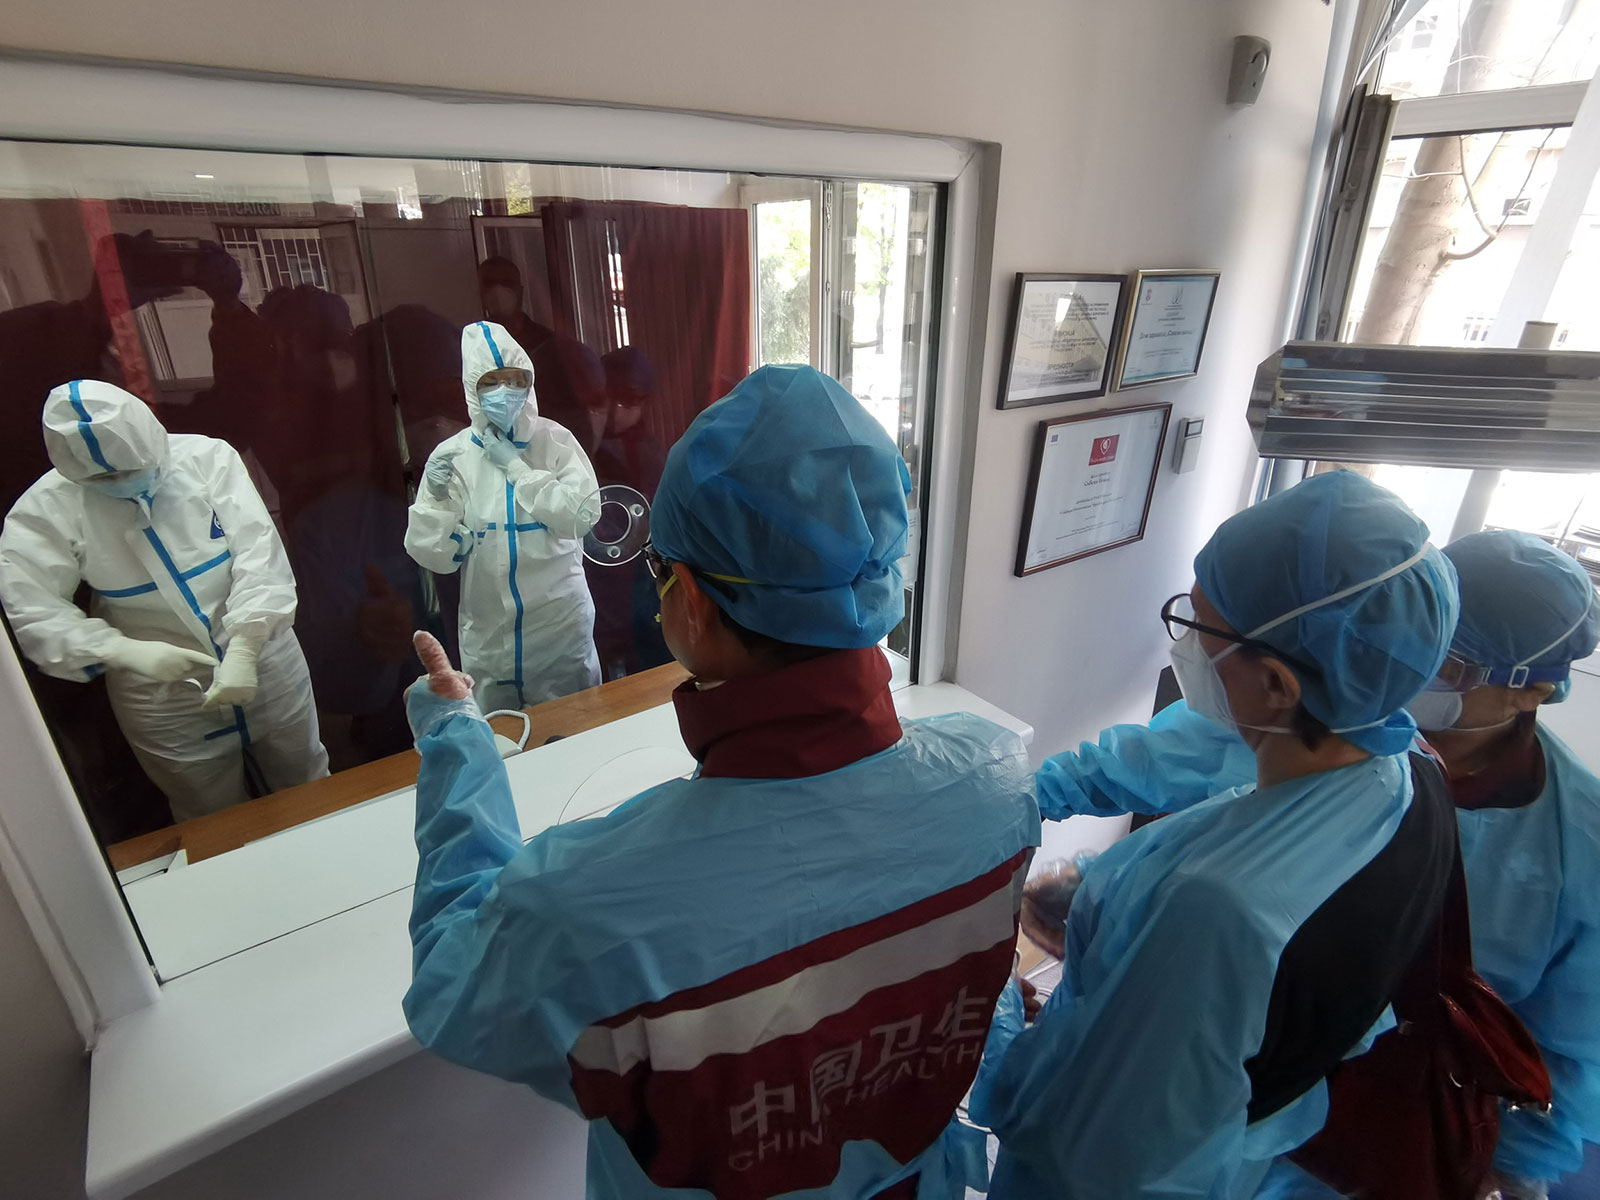 Members of a Chinese medical team visit a clinic in Belgrade, Serbia, on April 11.